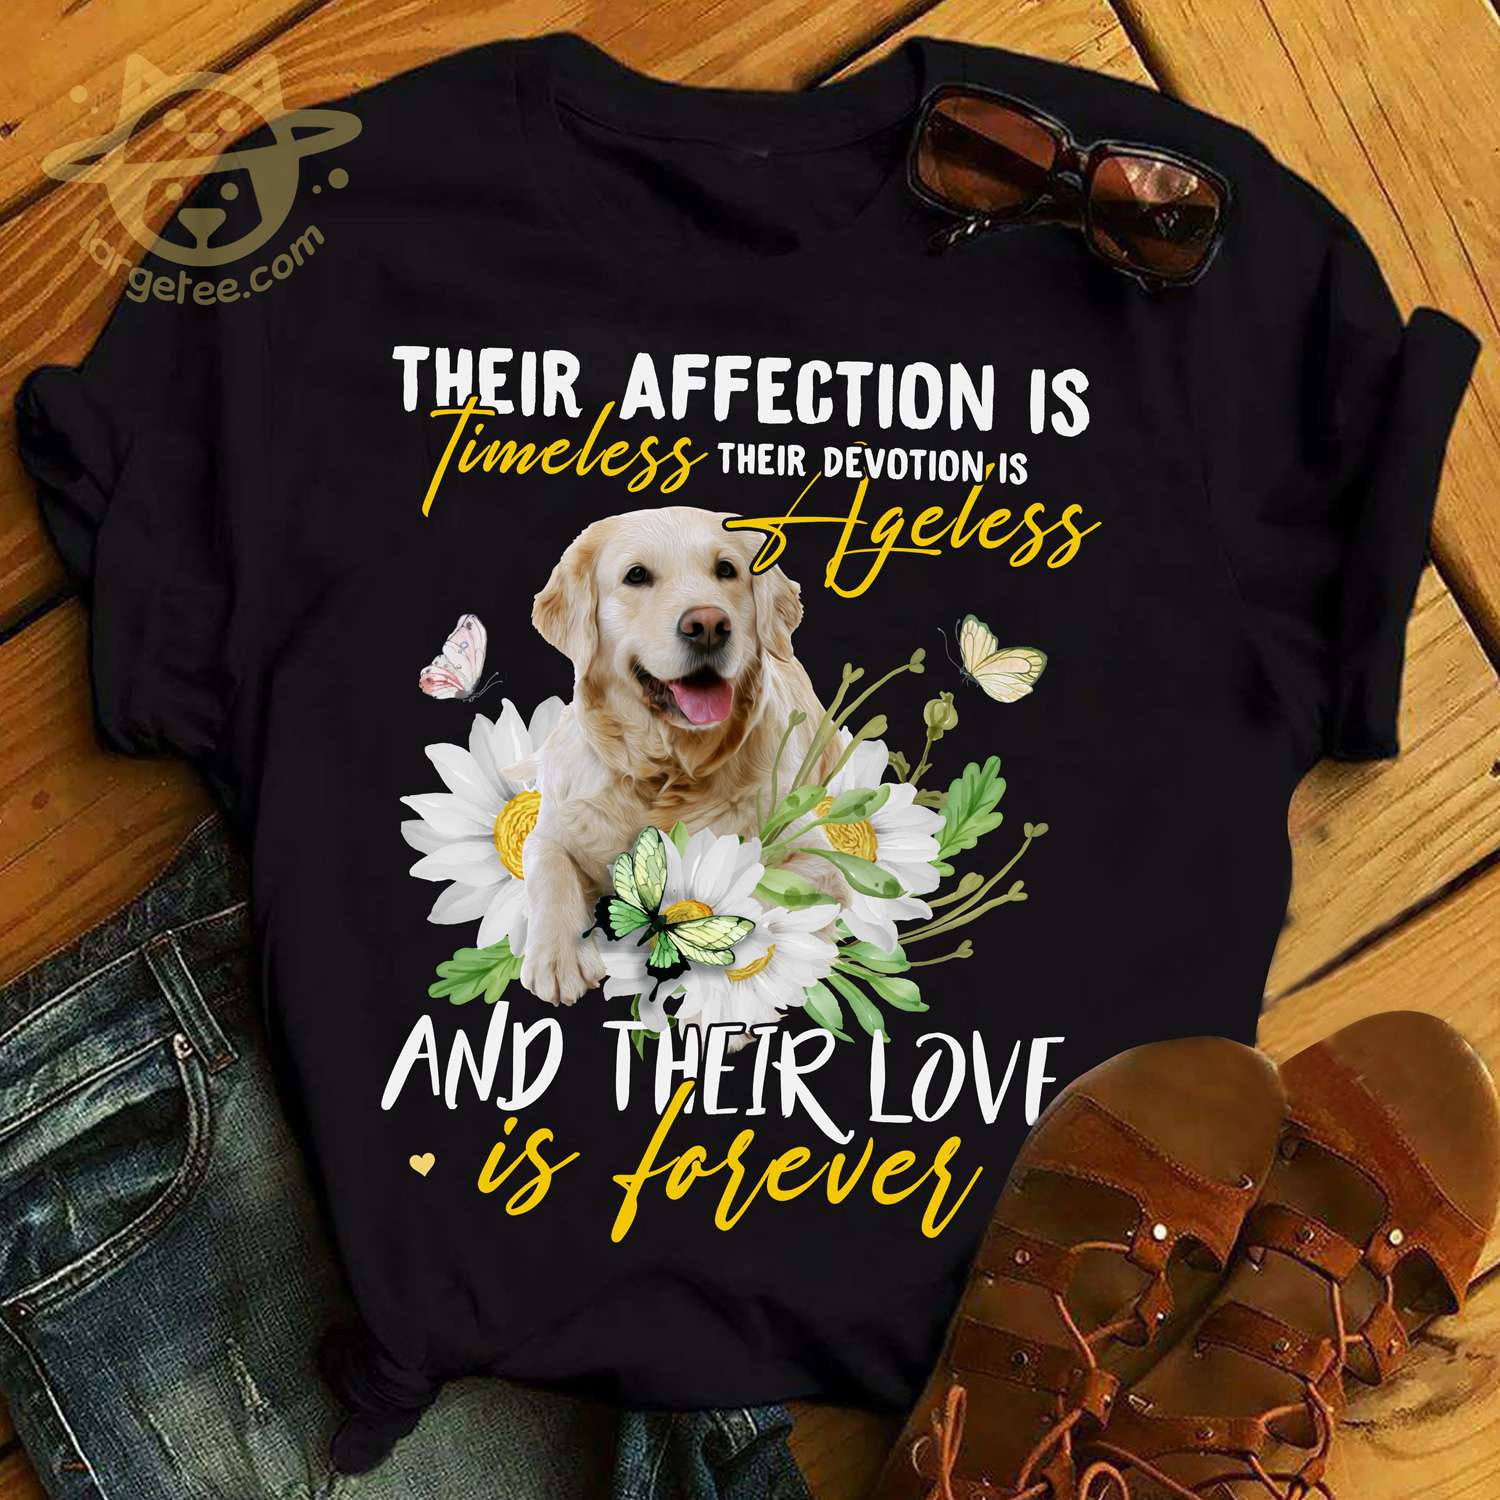 Their affection is timeless, their devotion is ageless and their love is forever - Golden dog